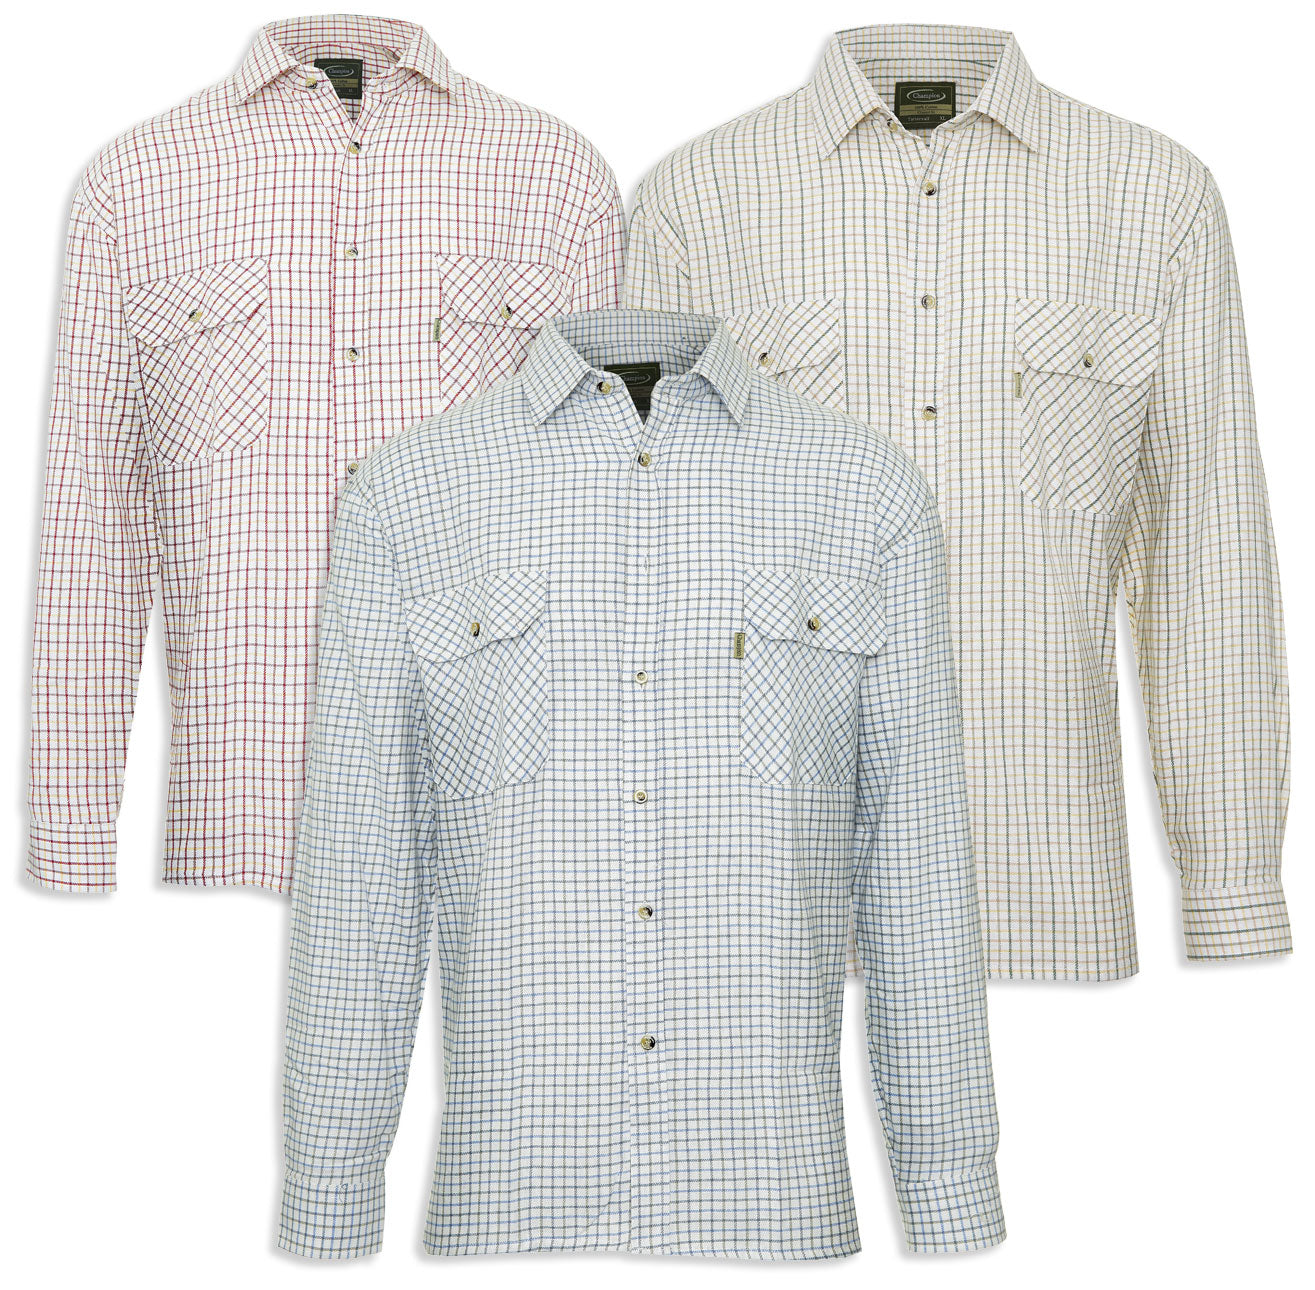 Champion 100% Cotton Tattersall Check Shirt with two chest pockets with button flaps 